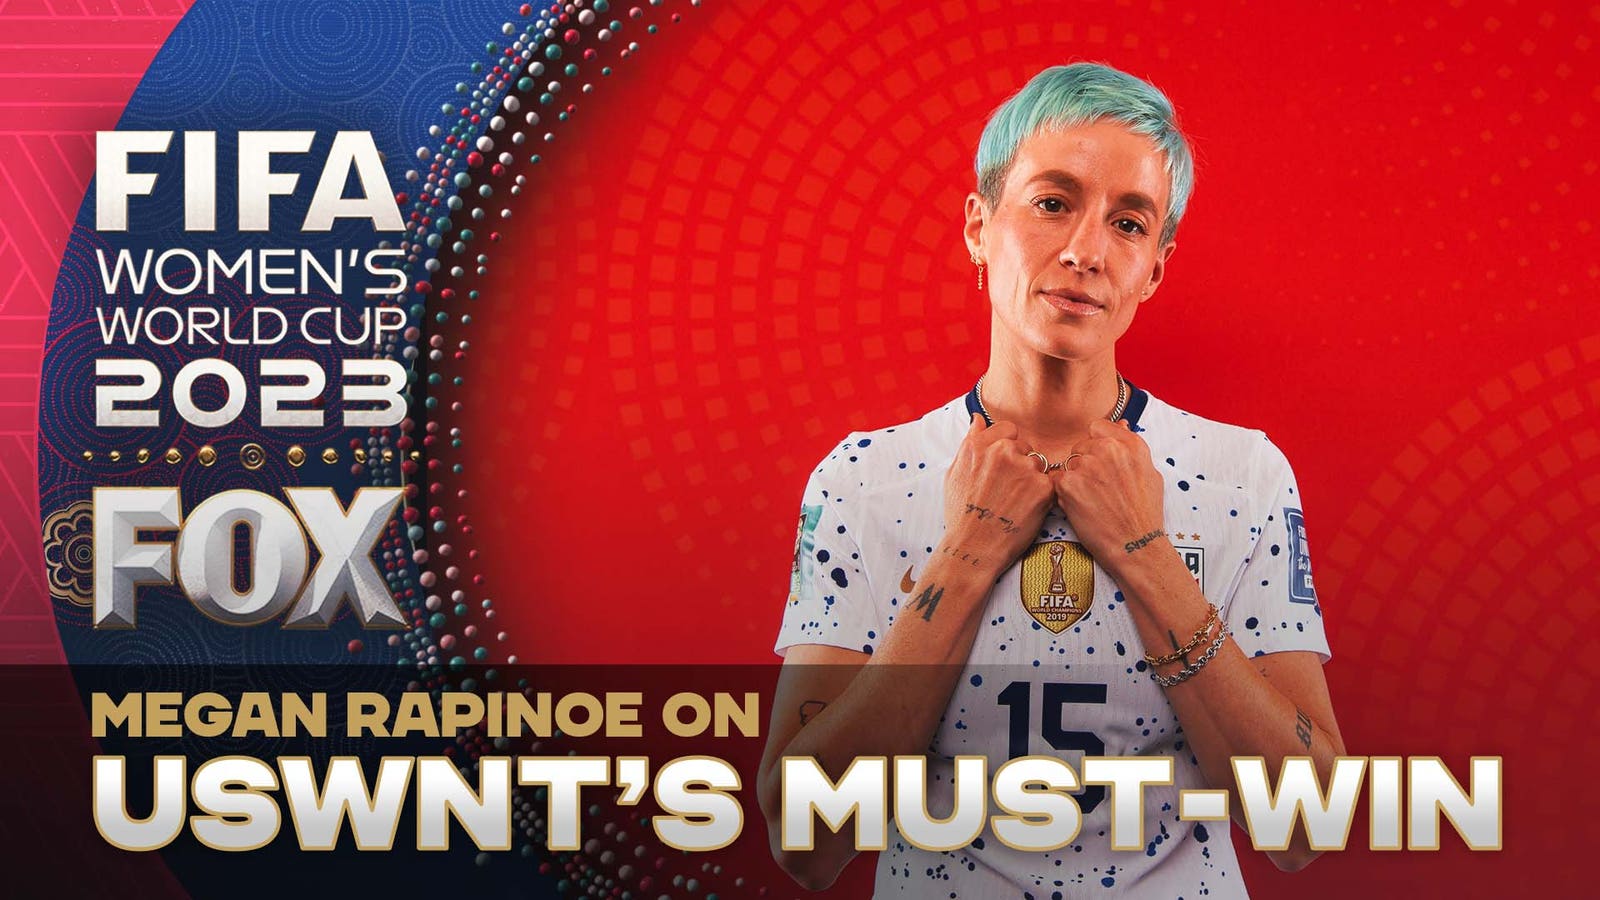 "This is what you train for" — USWNT's Megan Rapinoe on the must-win game vs. Portugal